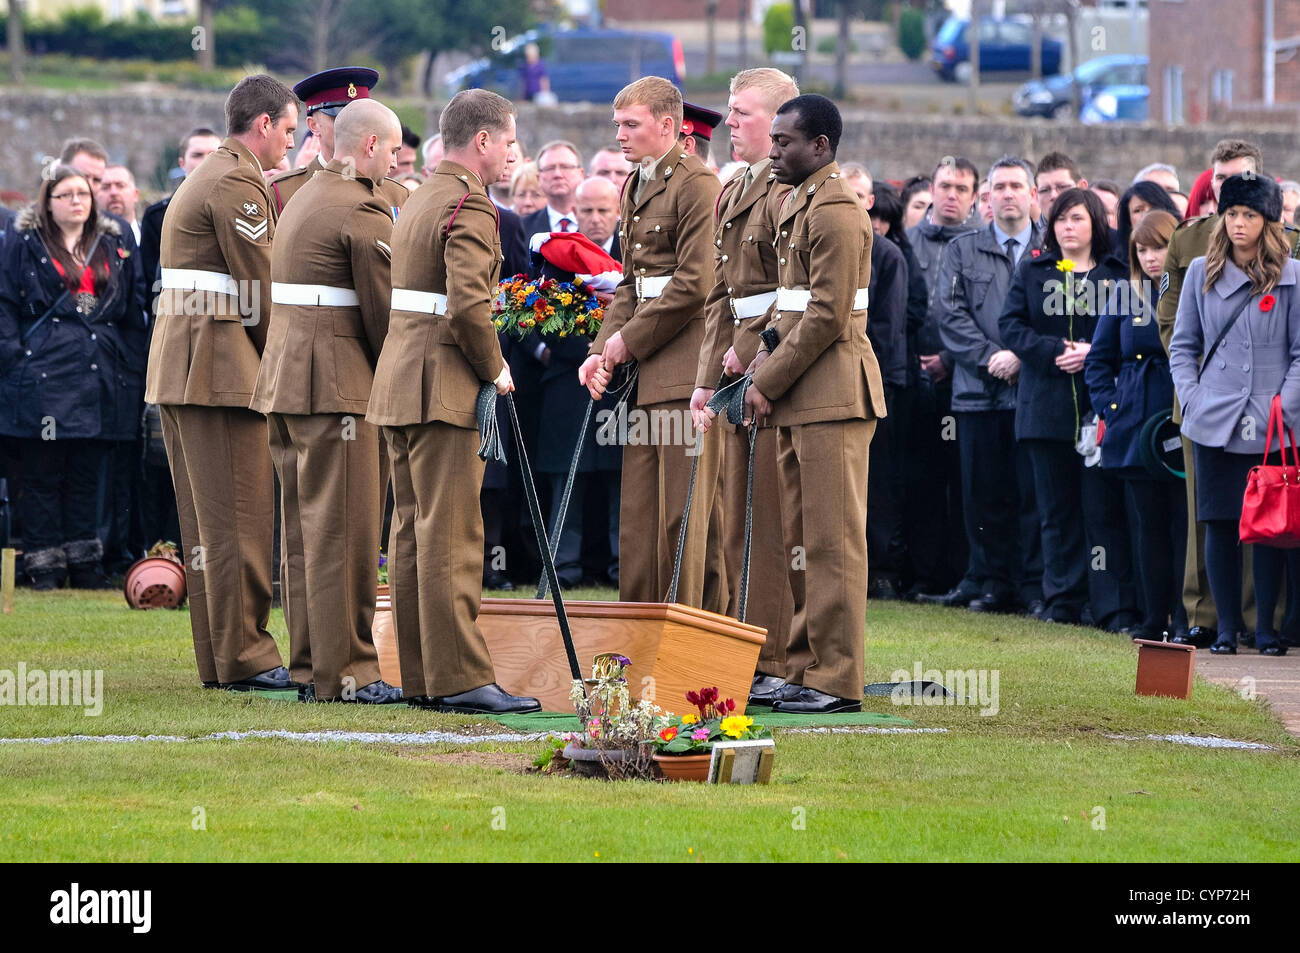 8th November 2012, Comber, Northern Ireland.  Over 1000 mourners attended the funeral of Corporal Channing Day (25) of 3 Medical Regiment, who was fatally injured in a gun battle while serving in Afghanistan.She was the third British woman to have died while serving in Afghanistan since 2001. Stock Photo